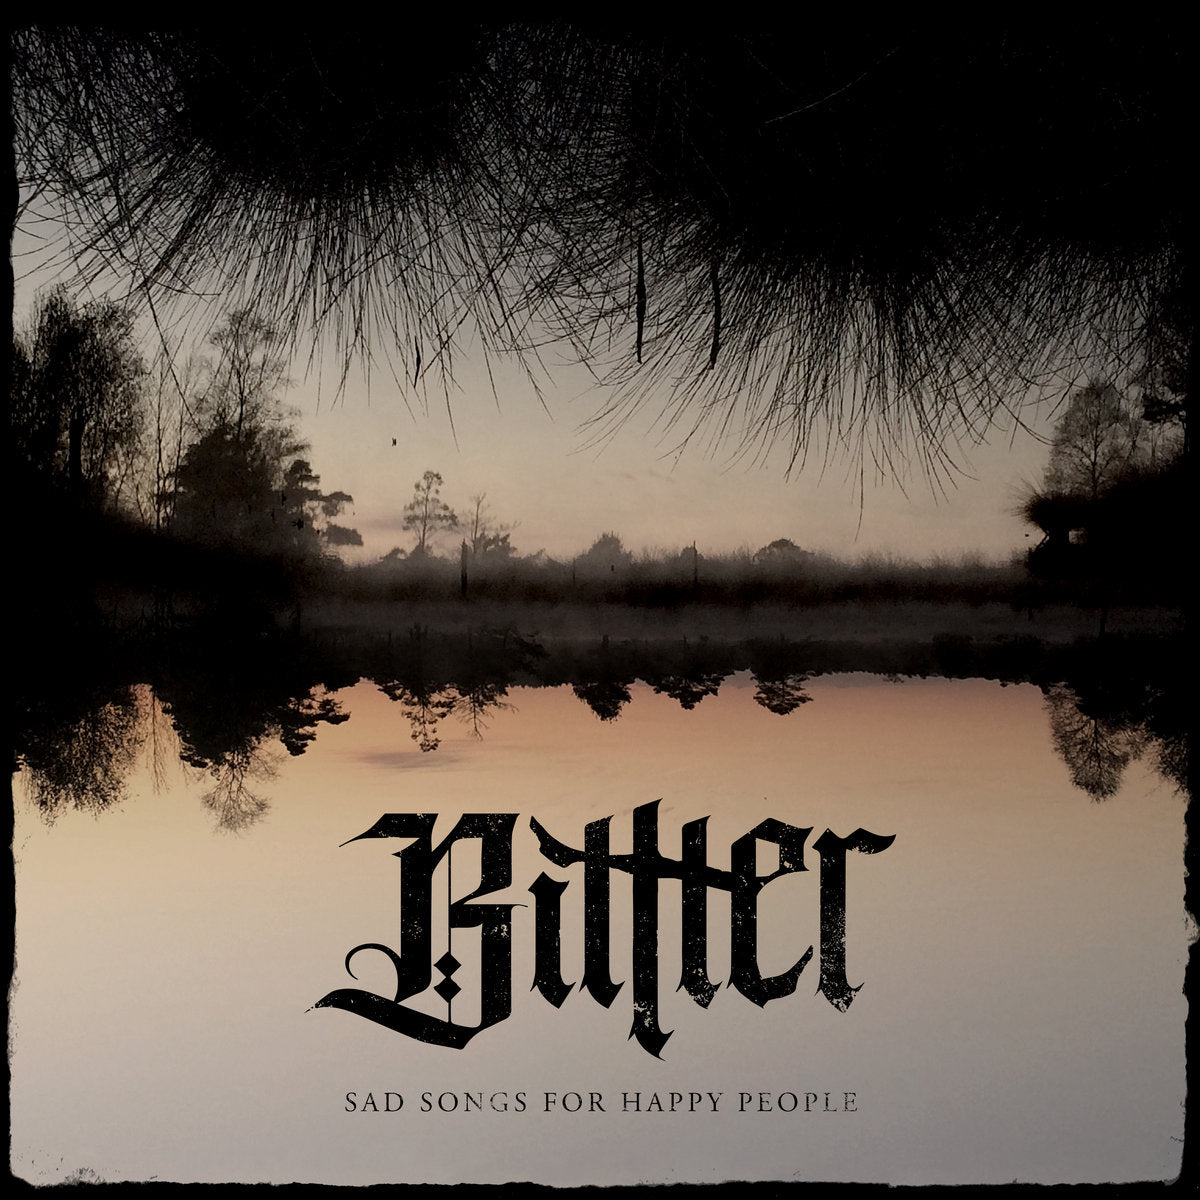 BITTTER • Sad Songs For Happy People (turqoise, 180g)• LP